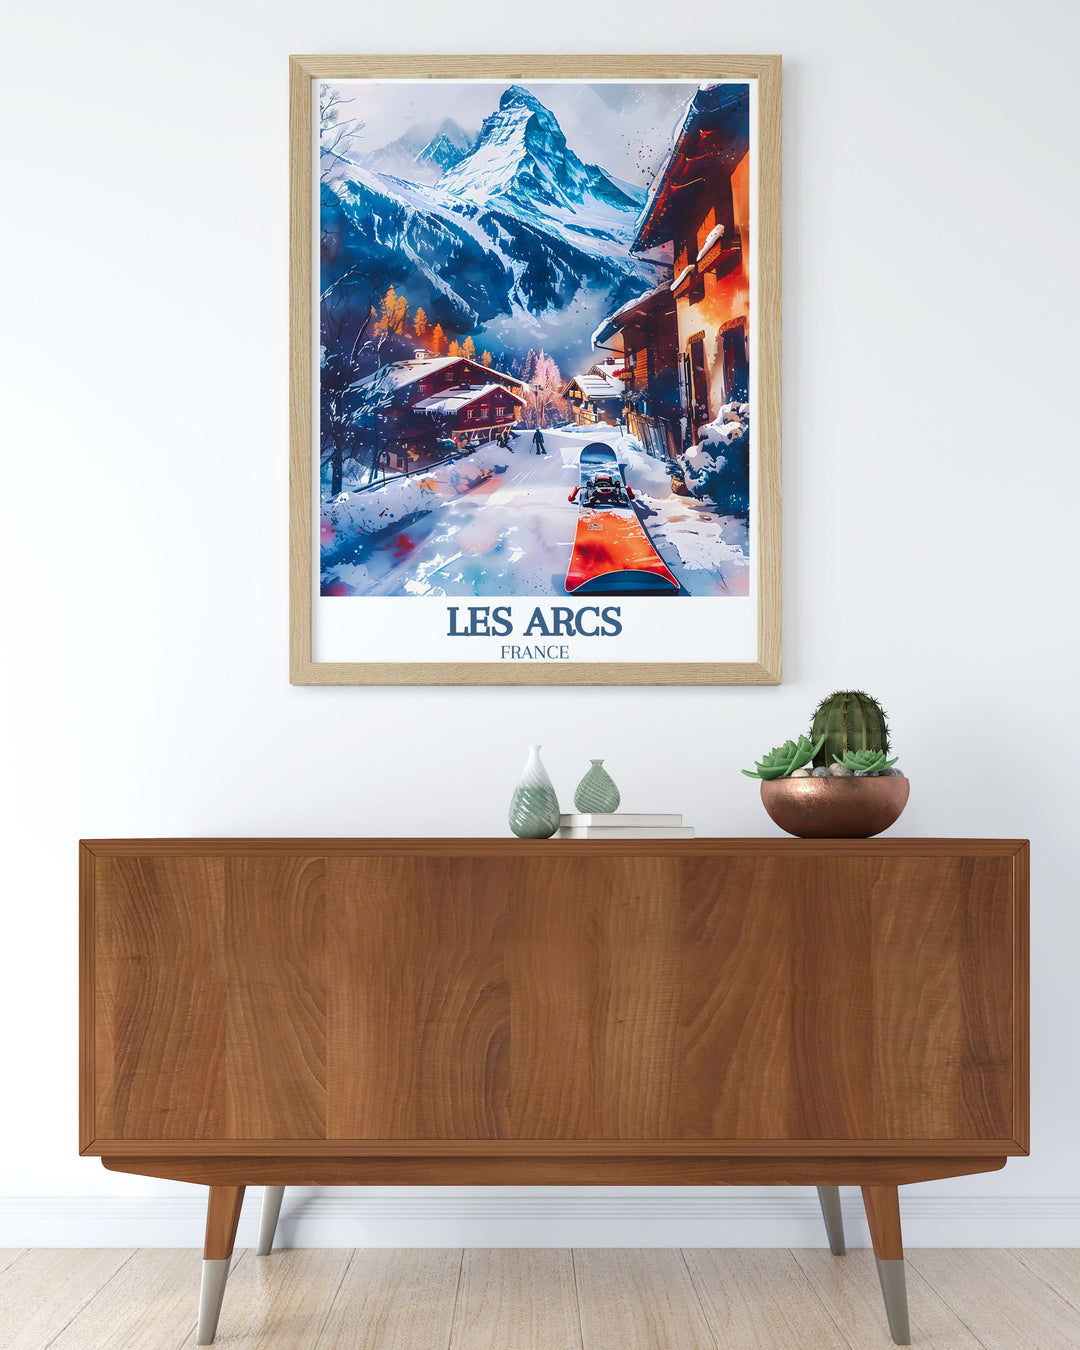 Framed Print of Paradiski ski area Les Arcs Ski resort Mont Blanc offering a stunning visual experience ideal for snowboarding enthusiasts and those who love winter sports and ski resort decor